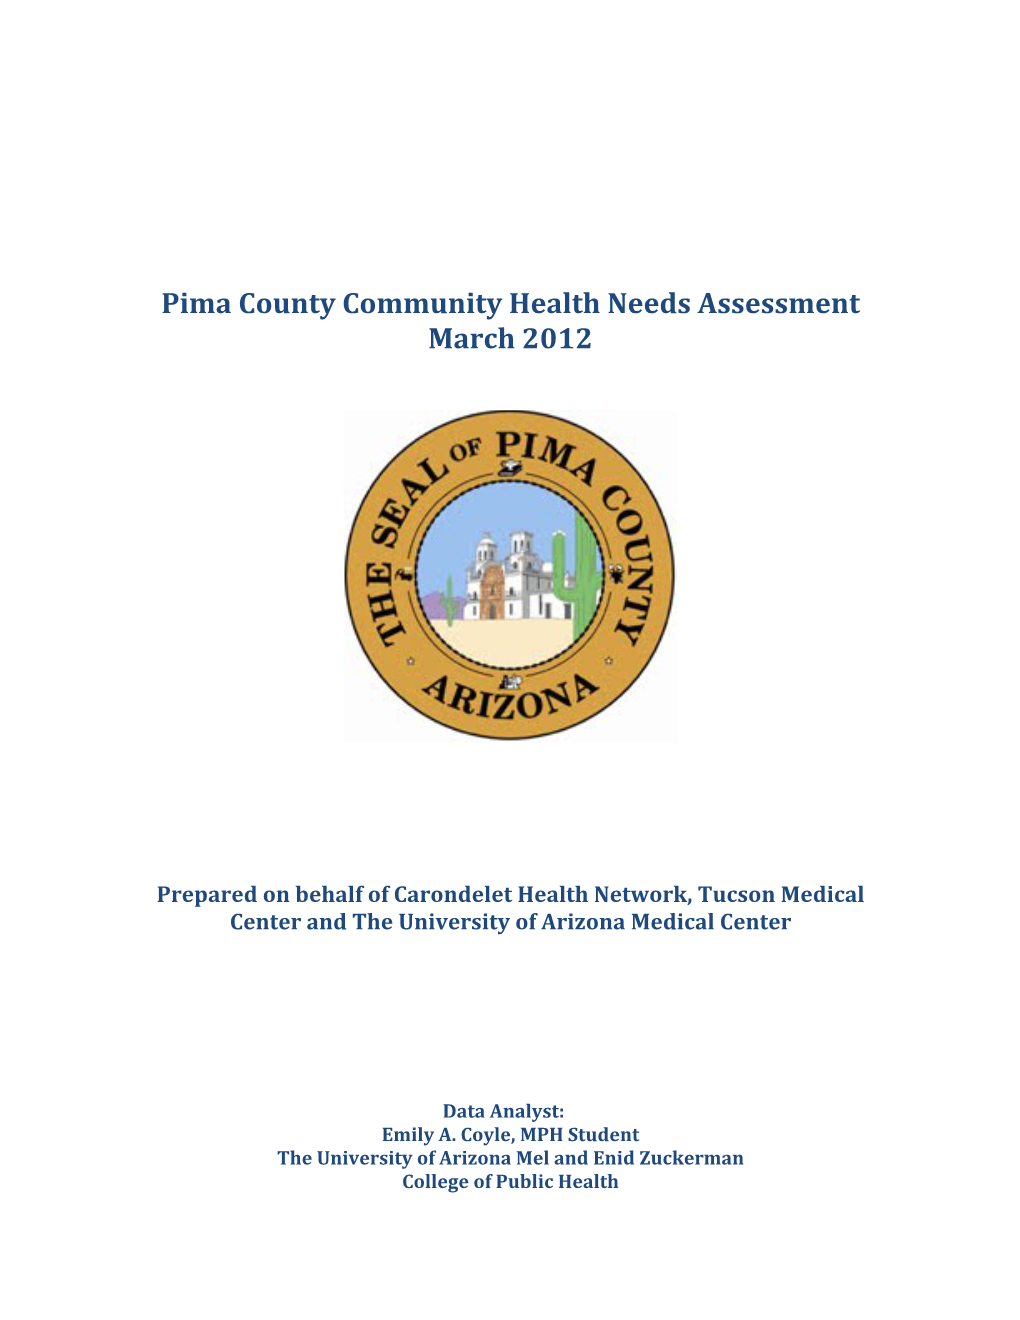 Pima County Community Health Needs Assessment March 2012